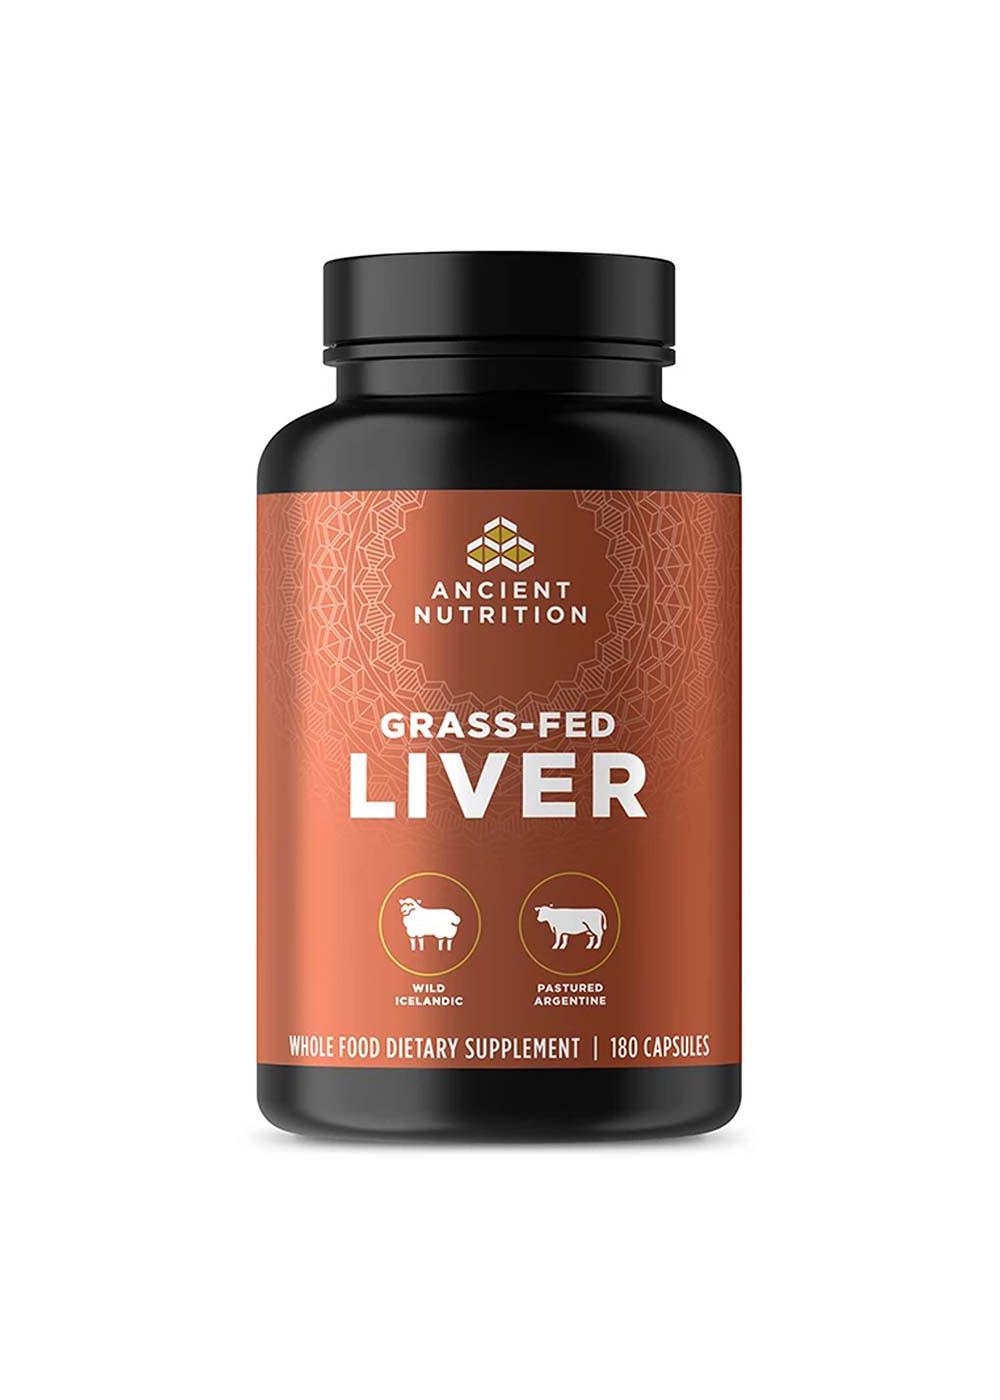 Ancient Nutrition Grass-Fed Liver Capsules; image 1 of 4